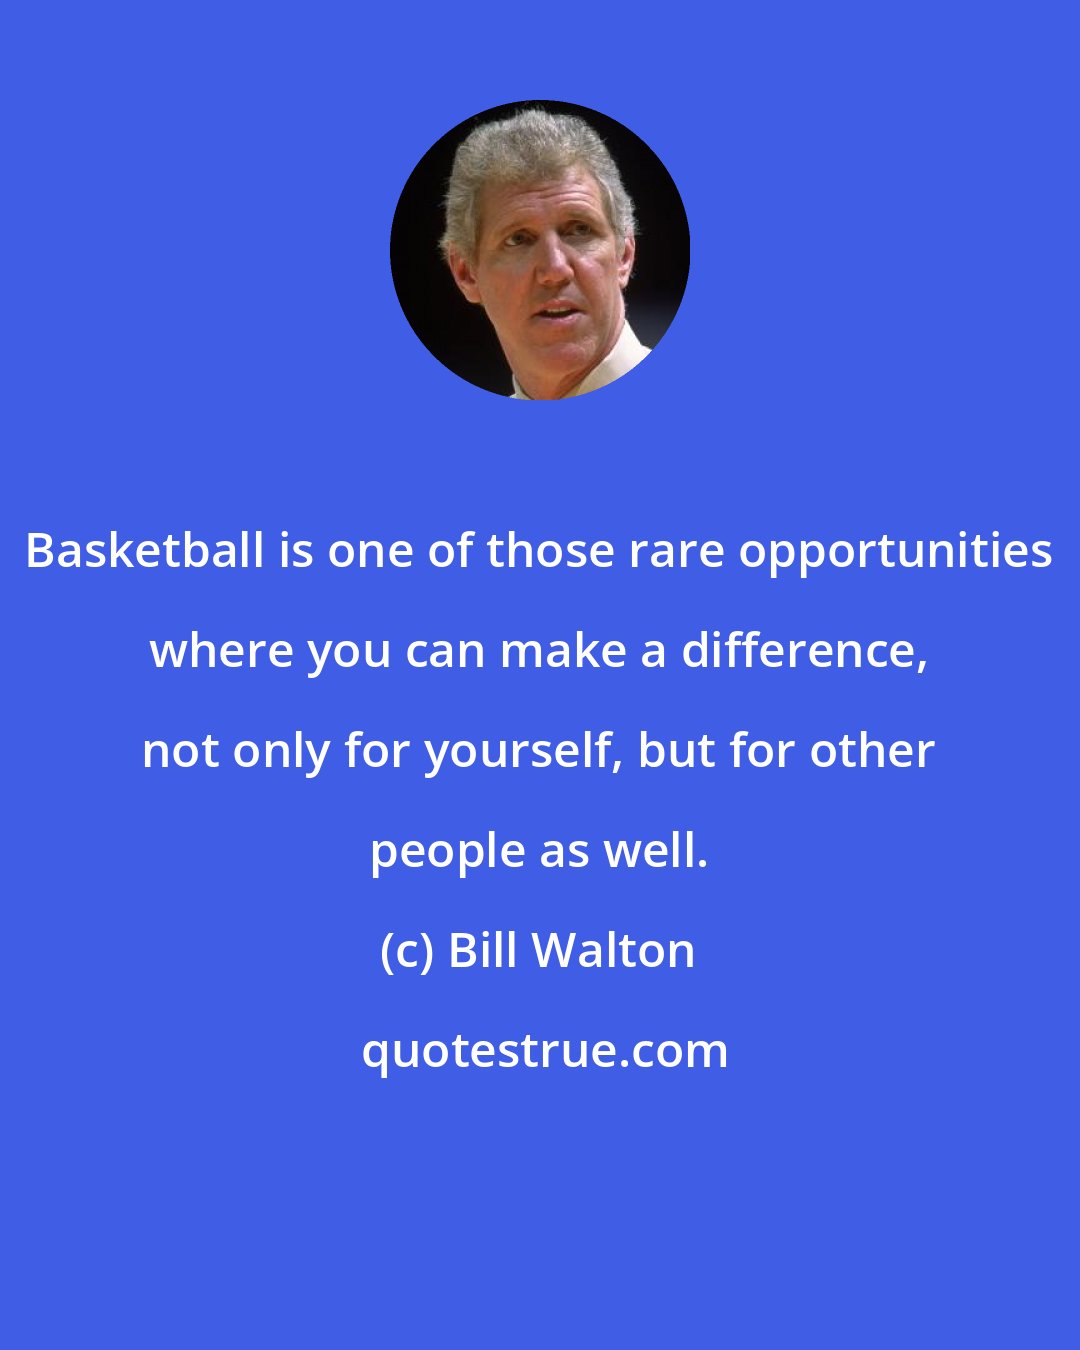 Bill Walton: Basketball is one of those rare opportunities where you can make a difference, not only for yourself, but for other people as well.